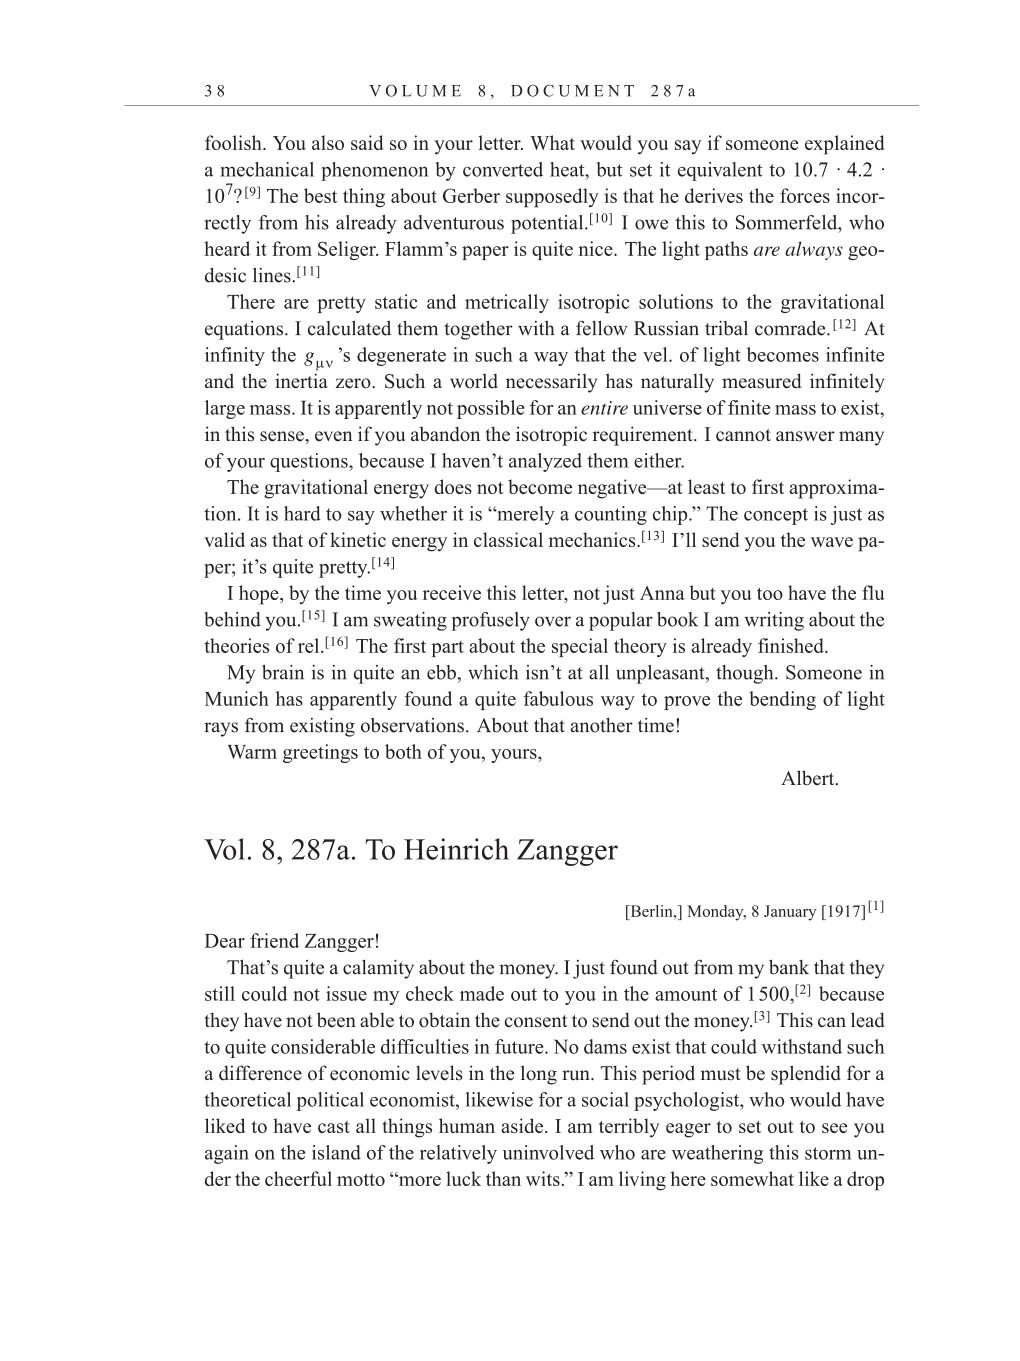 Volume 10: The Berlin Years: Correspondence, May-December 1920, and Supplementary Correspondence, 1909-1920 (English translation supplement) page 38